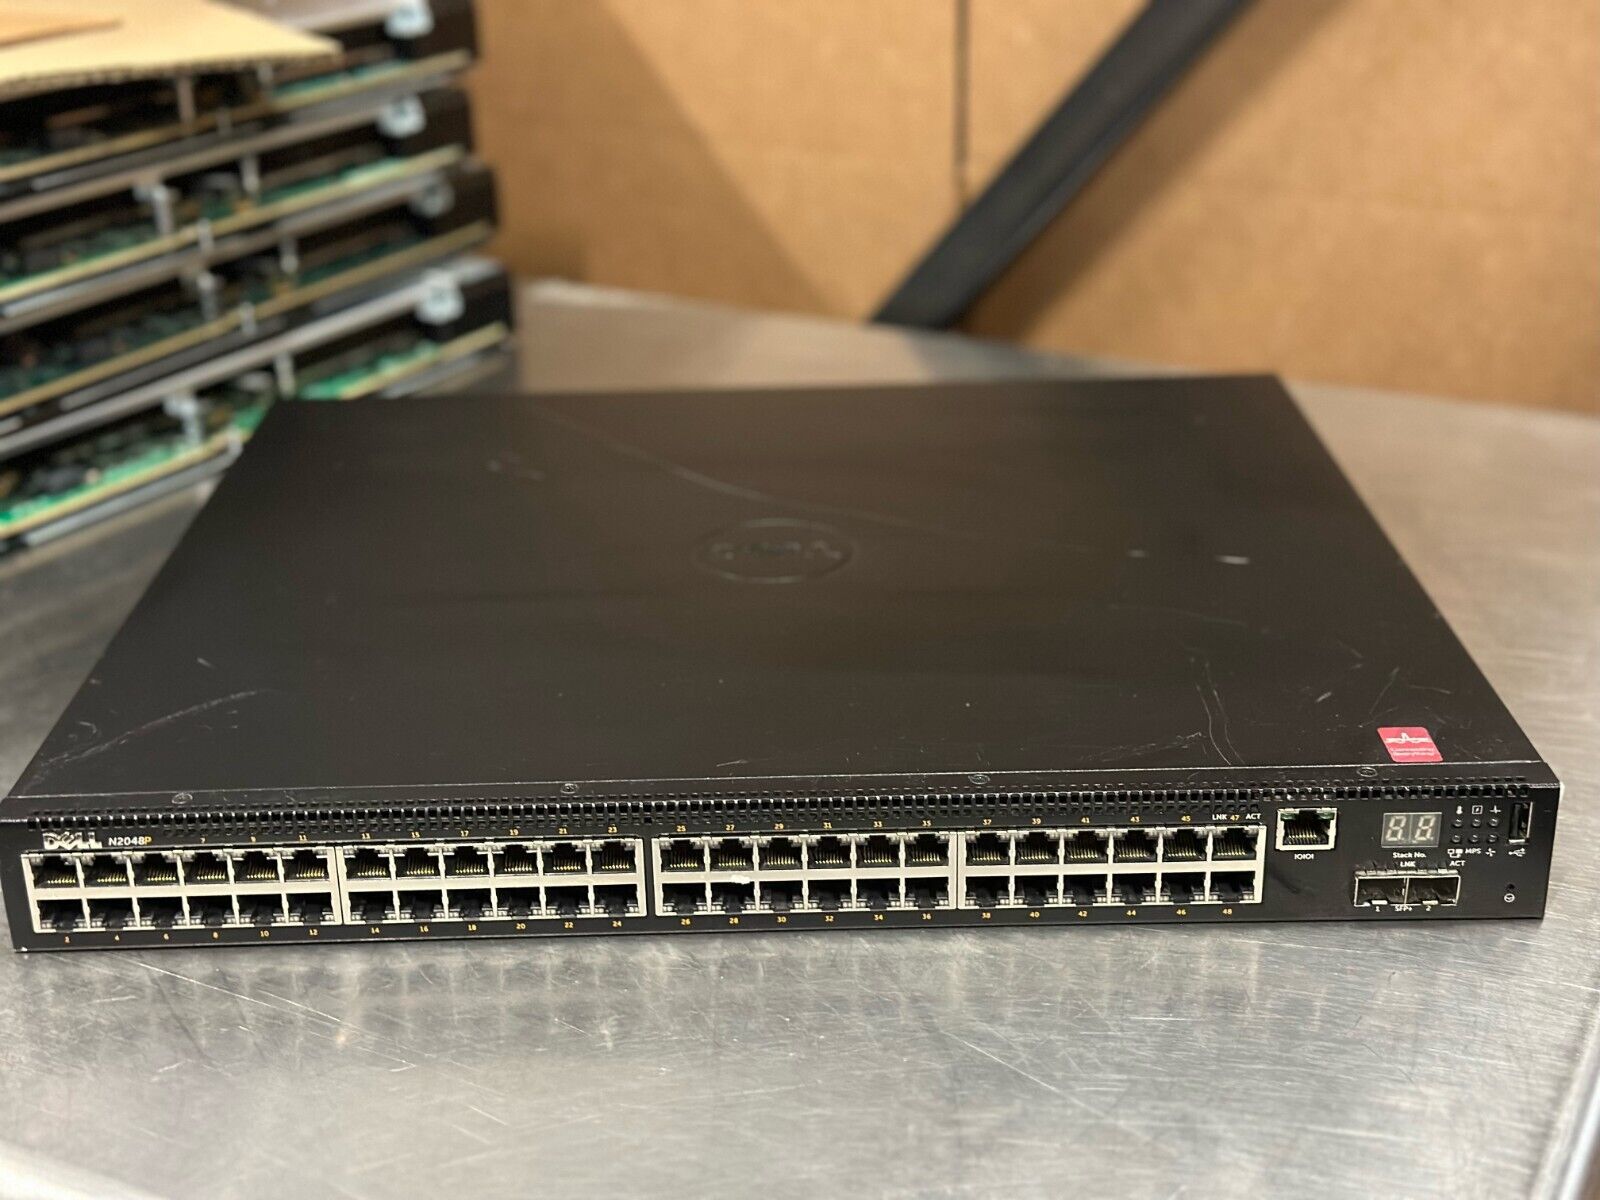 Dell Networking N2048P 48-Port PoE+ Managed Gigabit Ethernet Network Switch